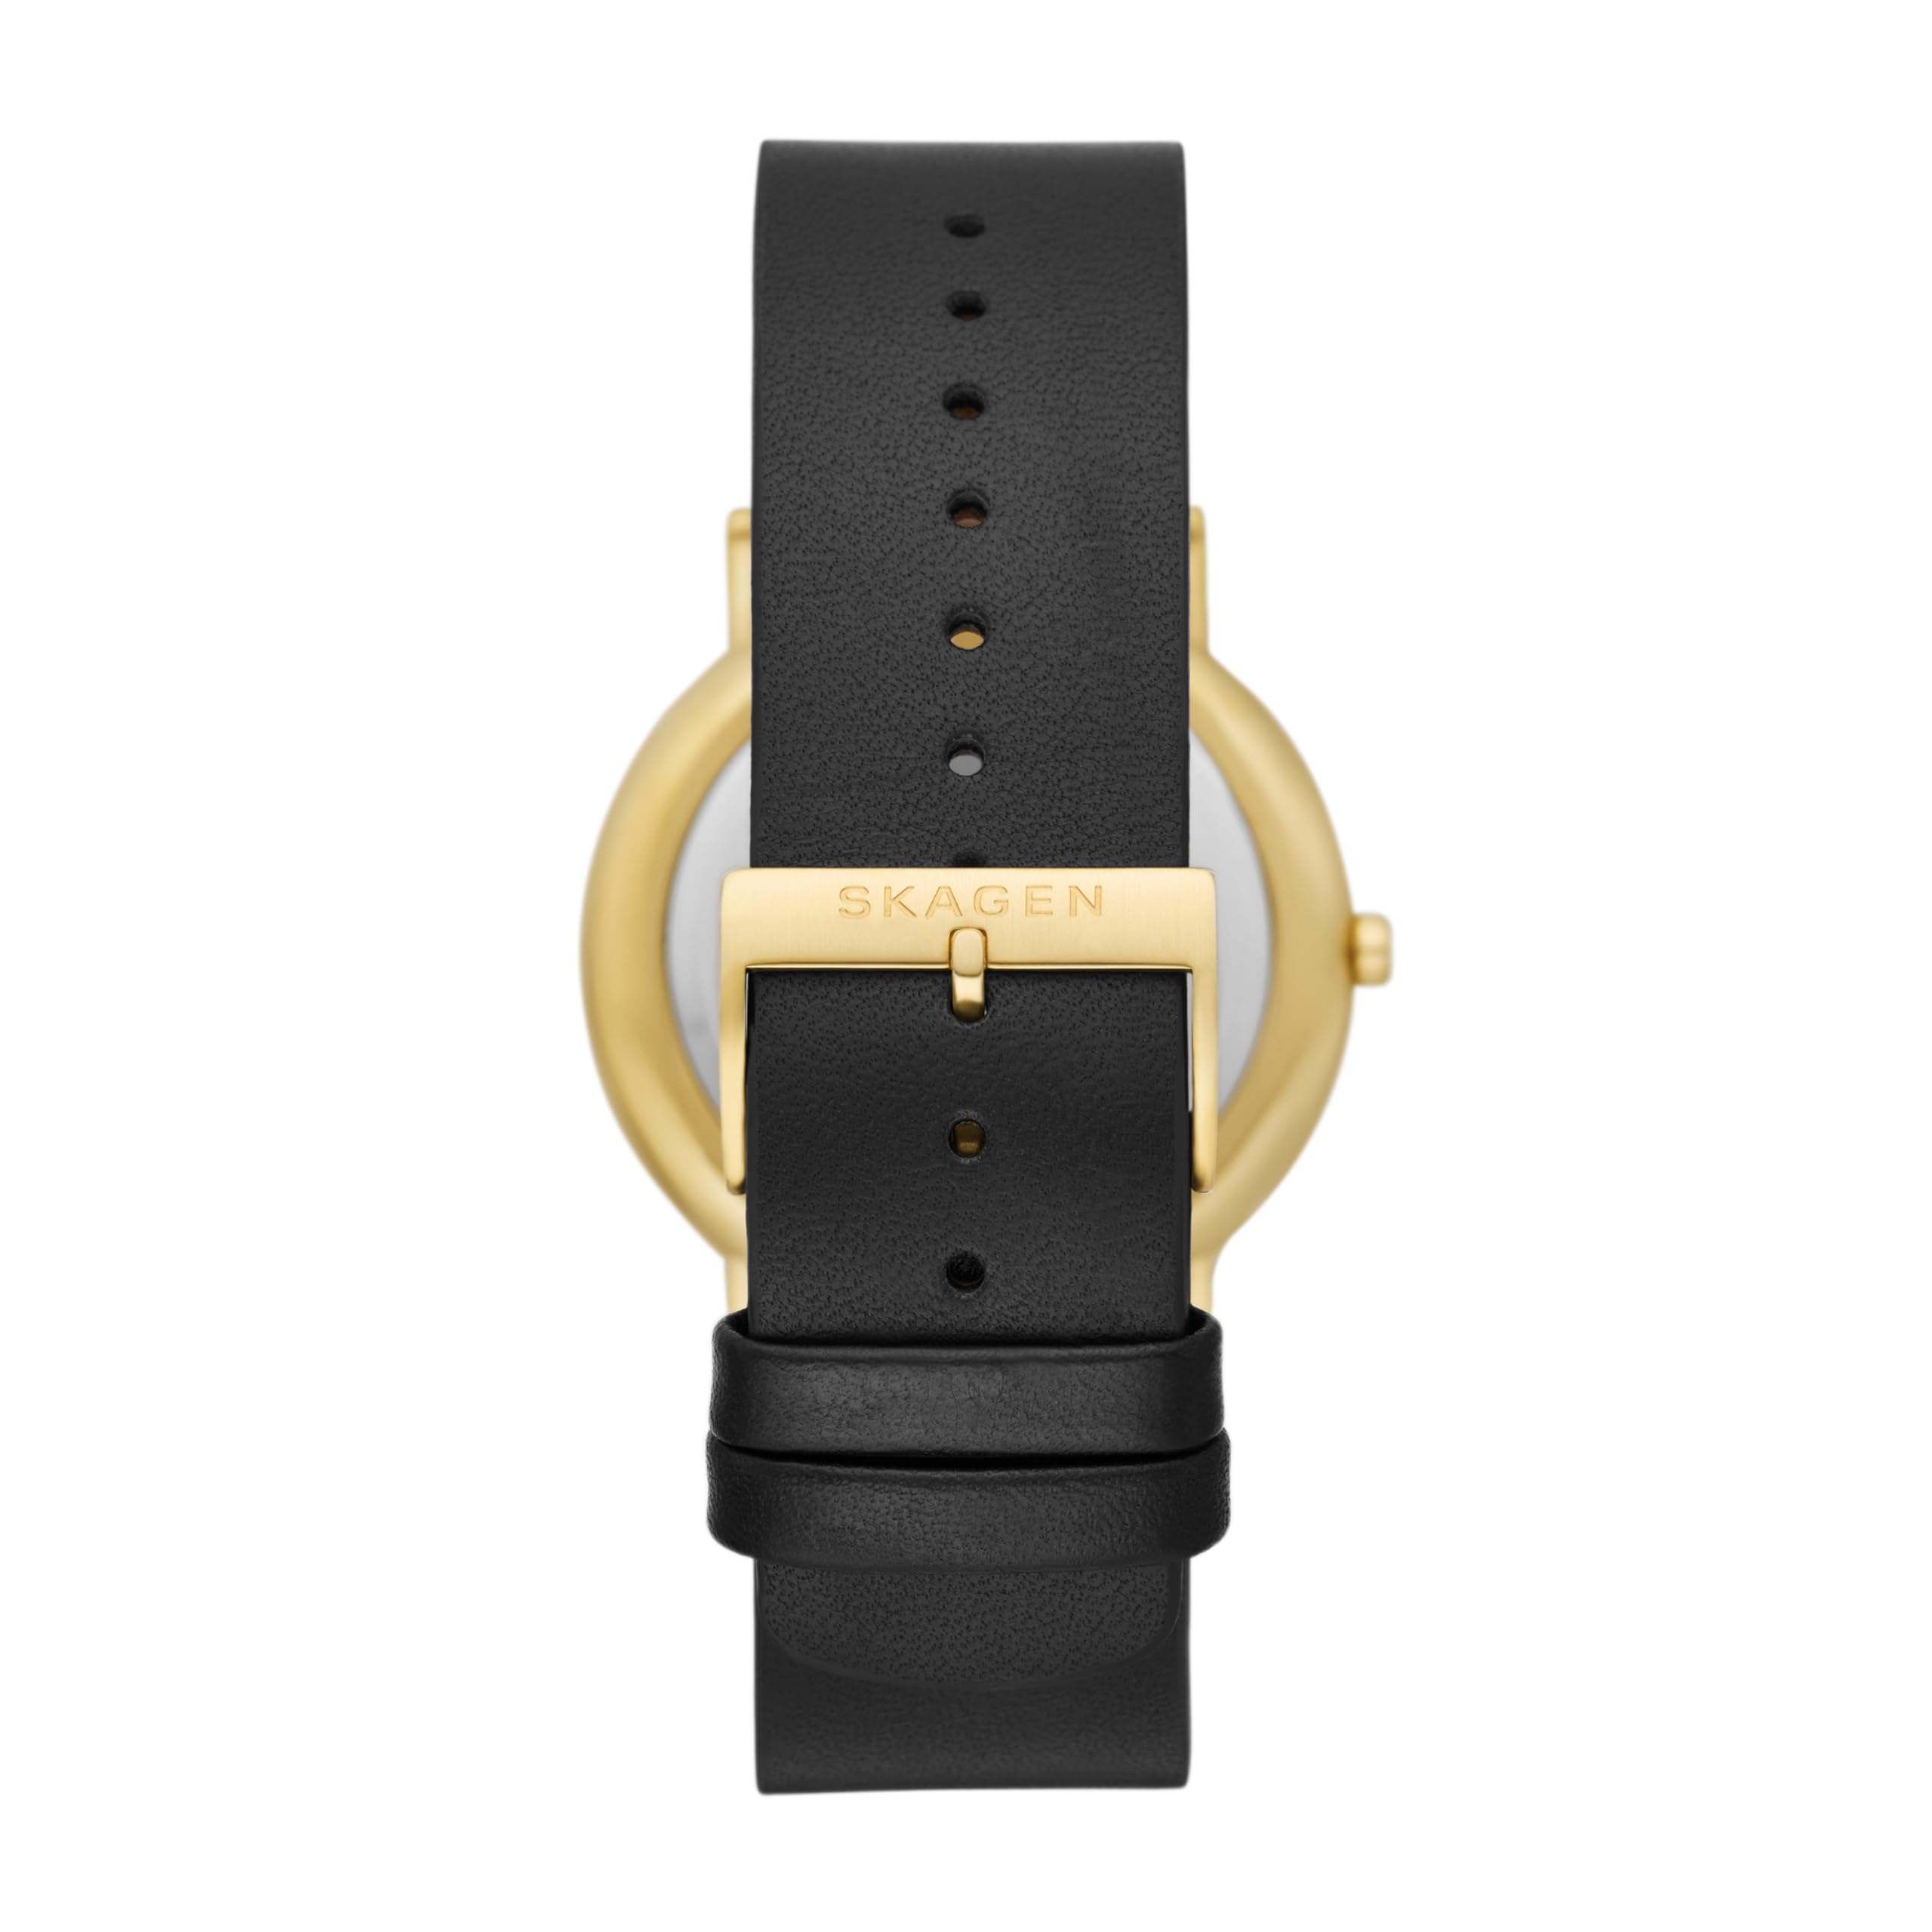 Skagen Men's Signatur Three-Hand Gold-Tone Stainless Steel and Black Leather Band Watch (Model: SKW6897)